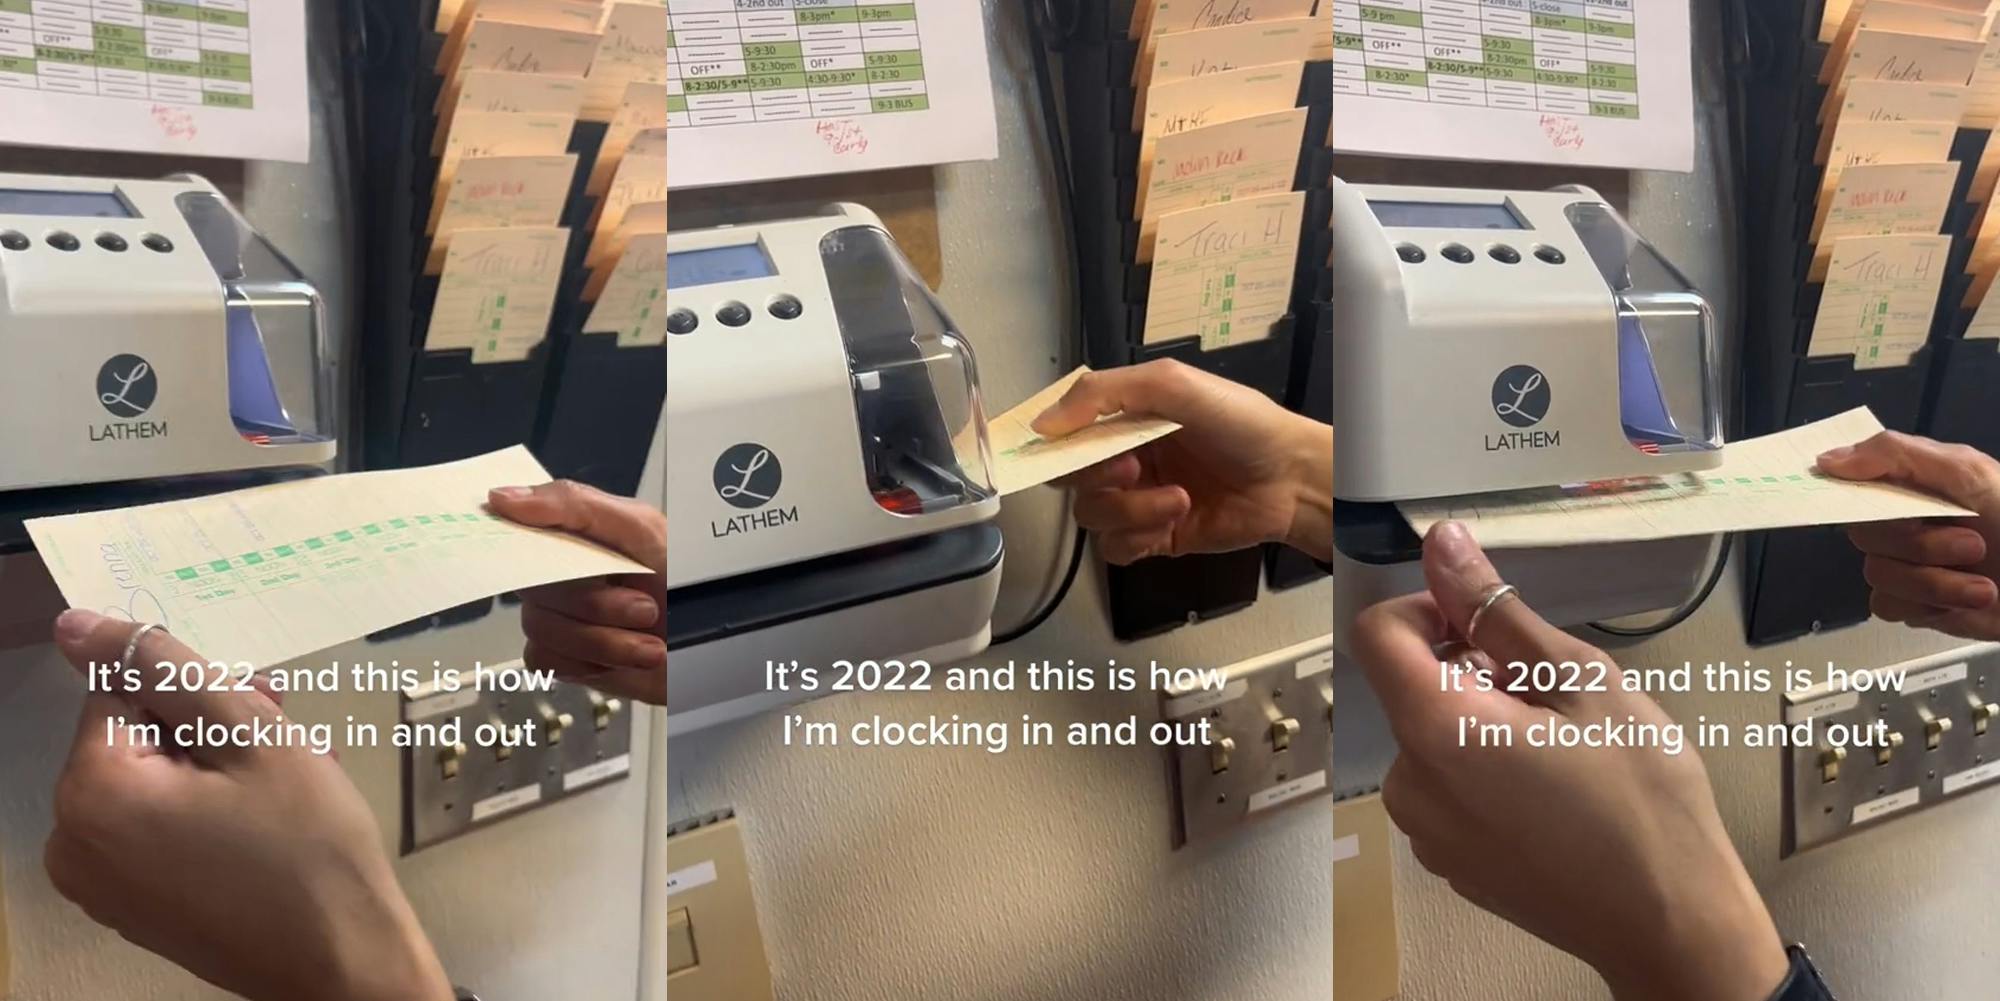 woman clocking in with card caption "It's 2022 and this is how I'm clocking in and out" (l) woman clocking in with card caption "It's 2022 and this is how I'm clocking in and out" (c) woman clocking in with card caption "It's 2022 and this is how I'm clocking in and out" (r)